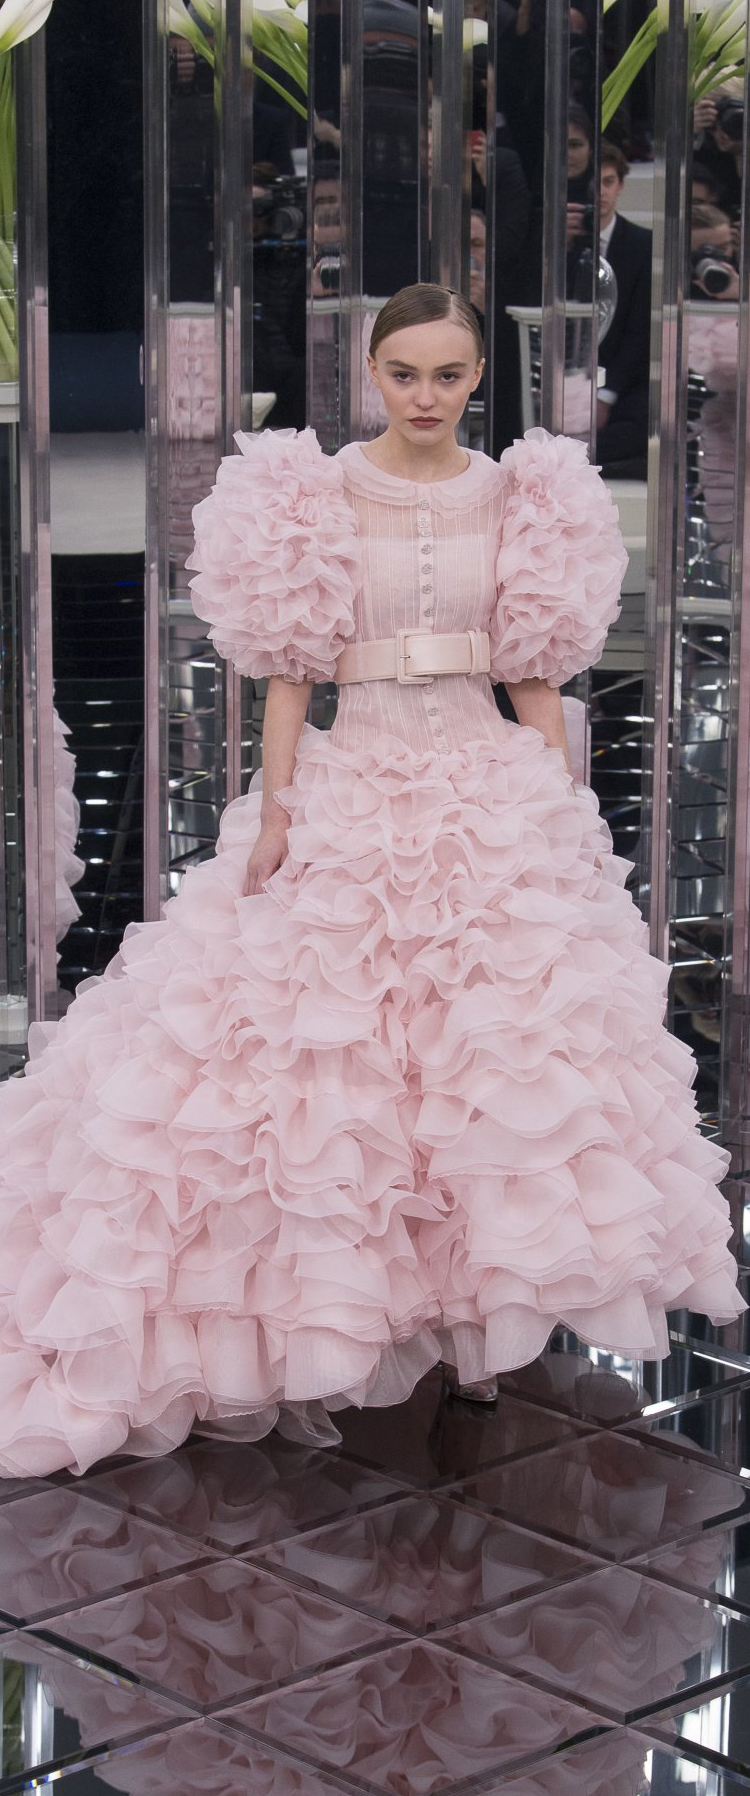 chanel-haute-couture-2017-spring-pink-ruffles-long-organza-evening-ball-gown  | Glamorous Luxury Passion